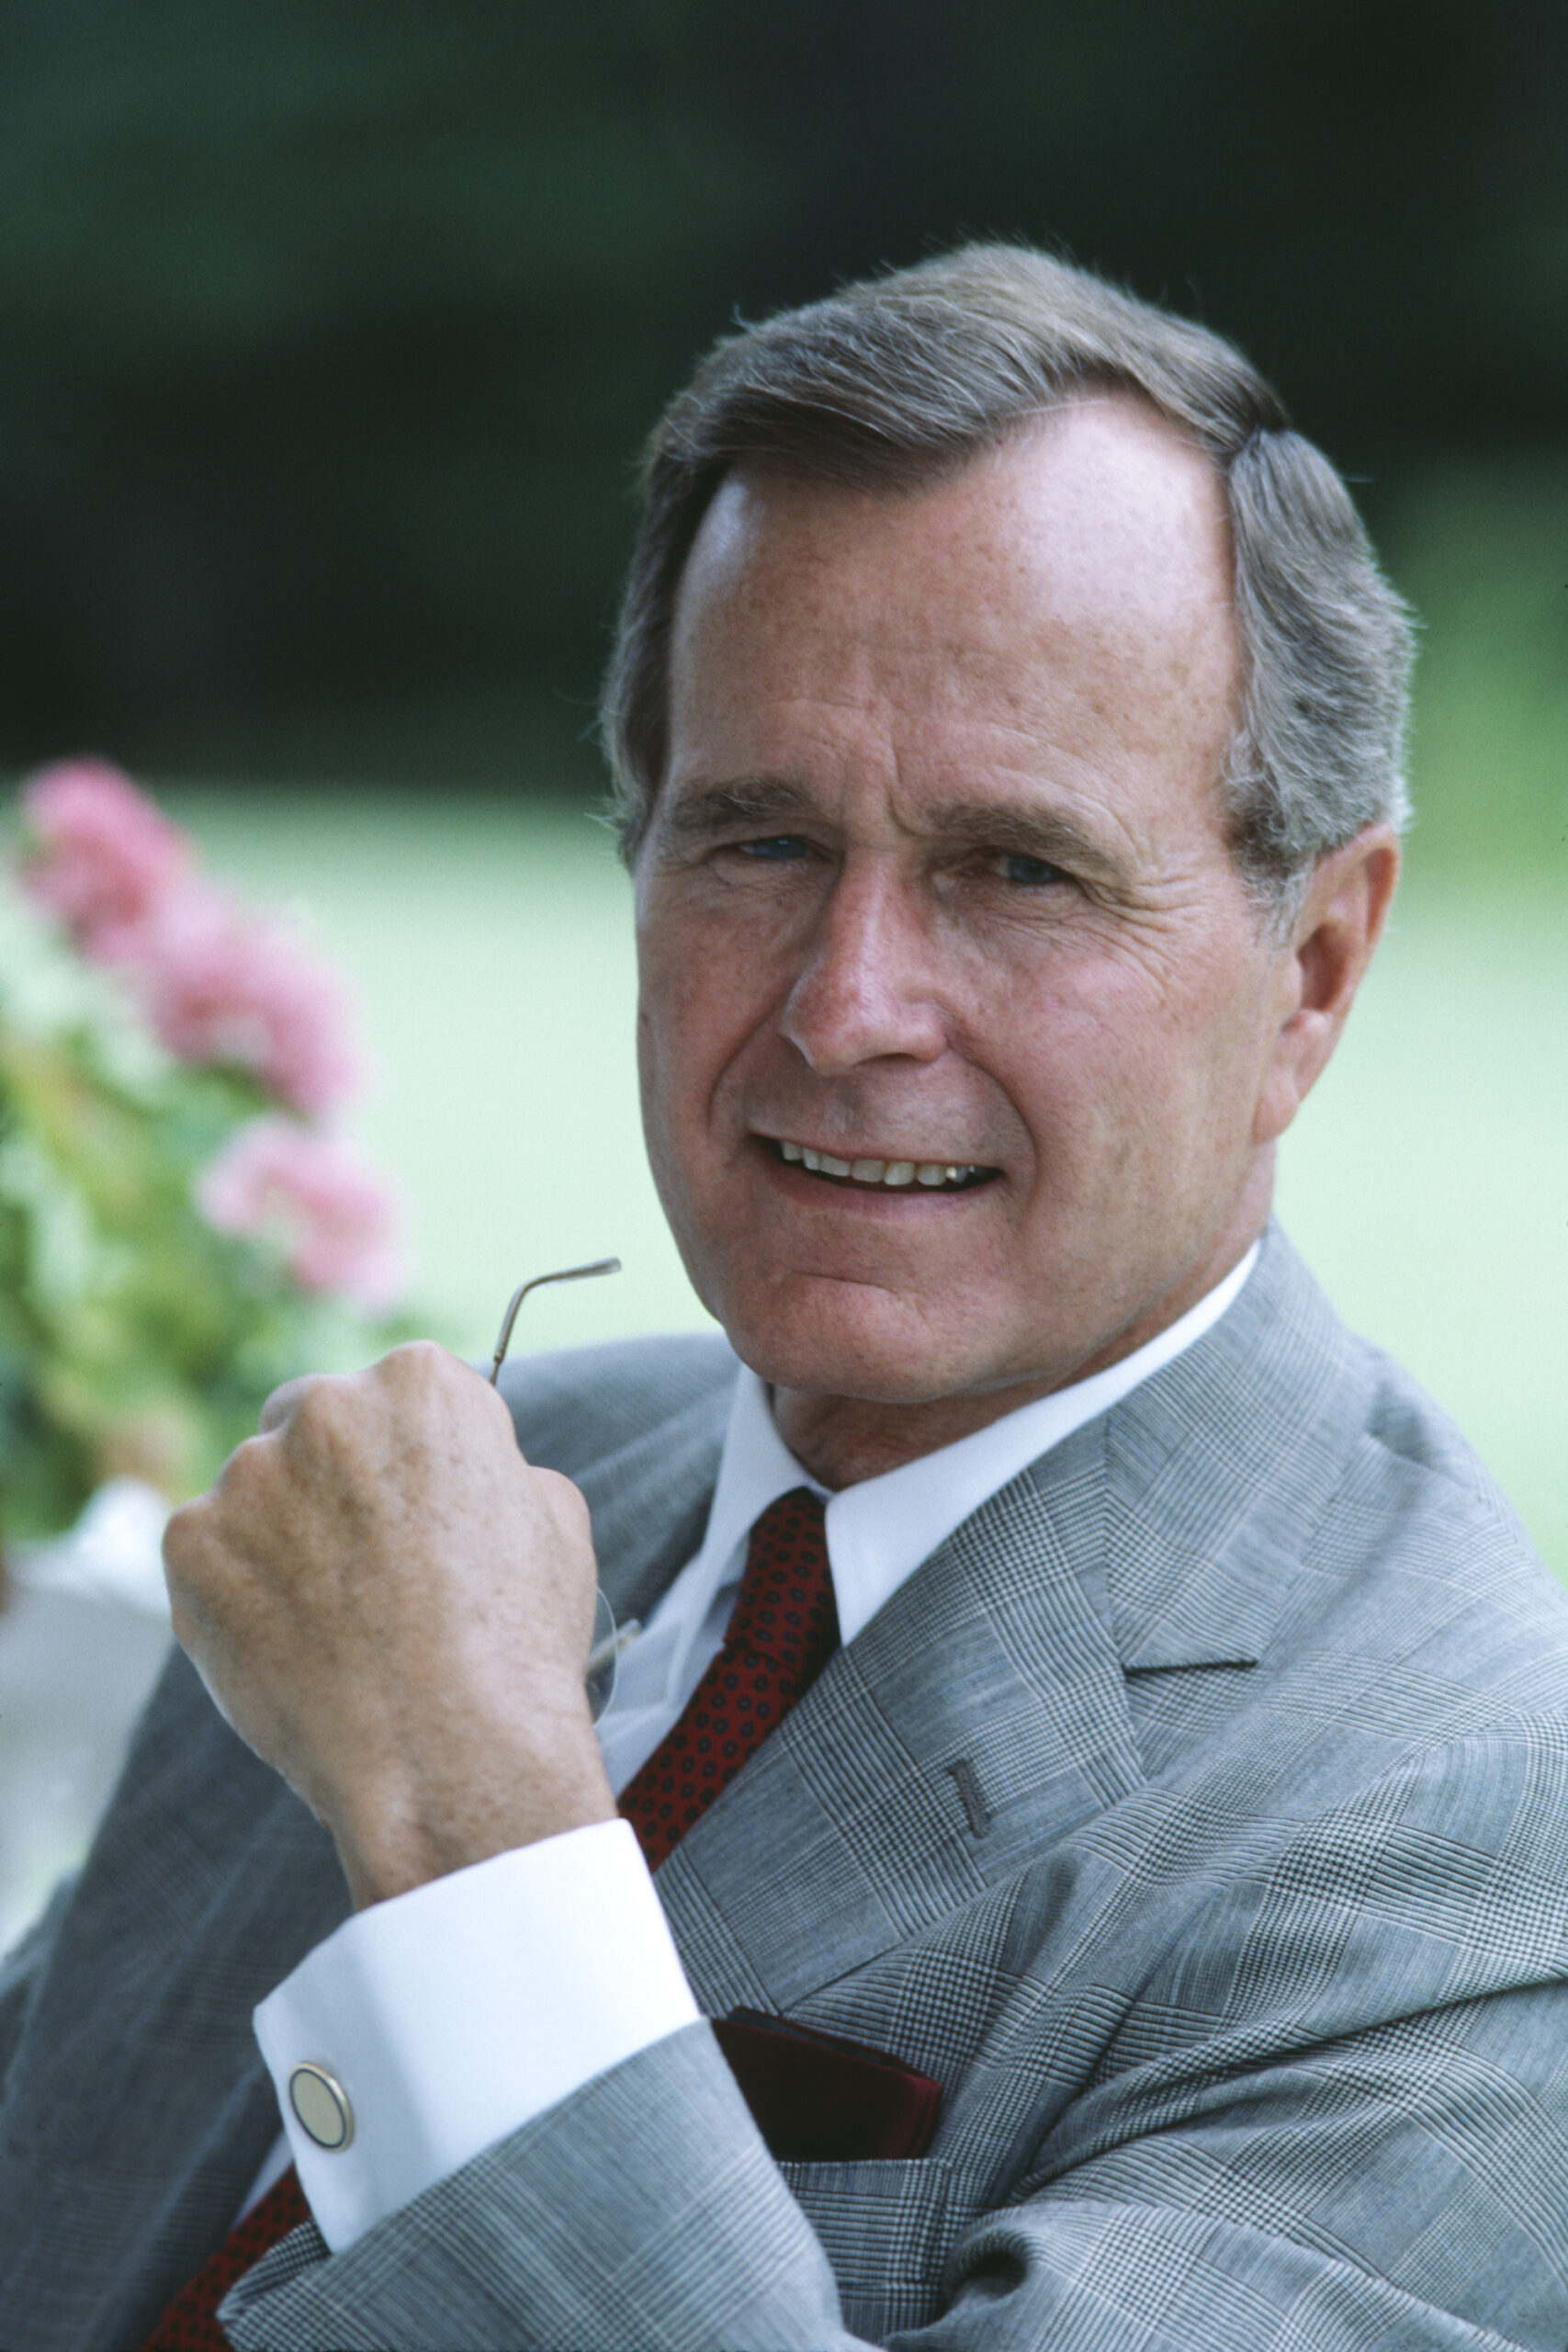 Profiles and Perspectives: President Bush Responds